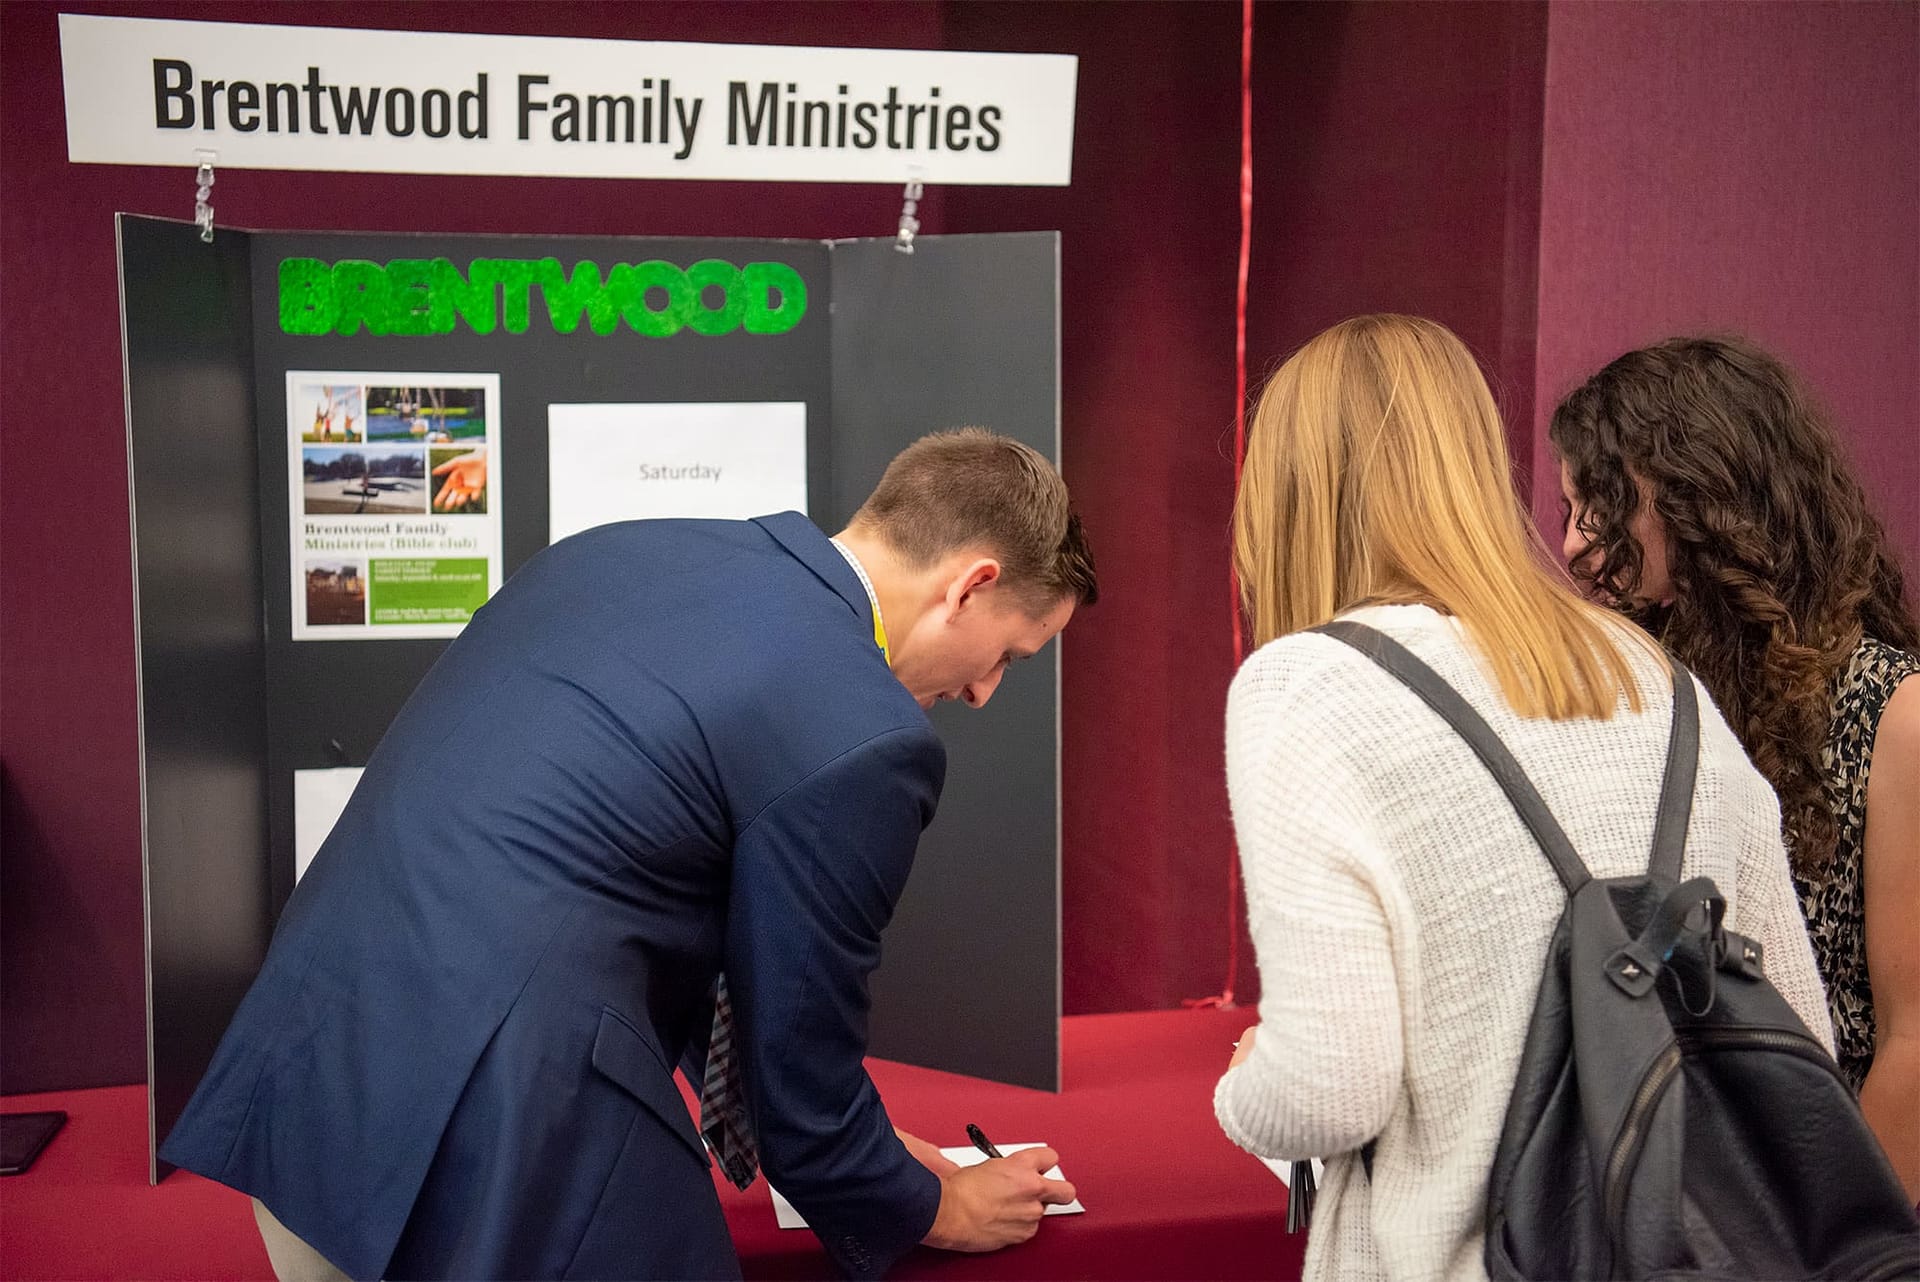 Two girls talk to a male studnet about volunteering with Brentwood Family Ministries